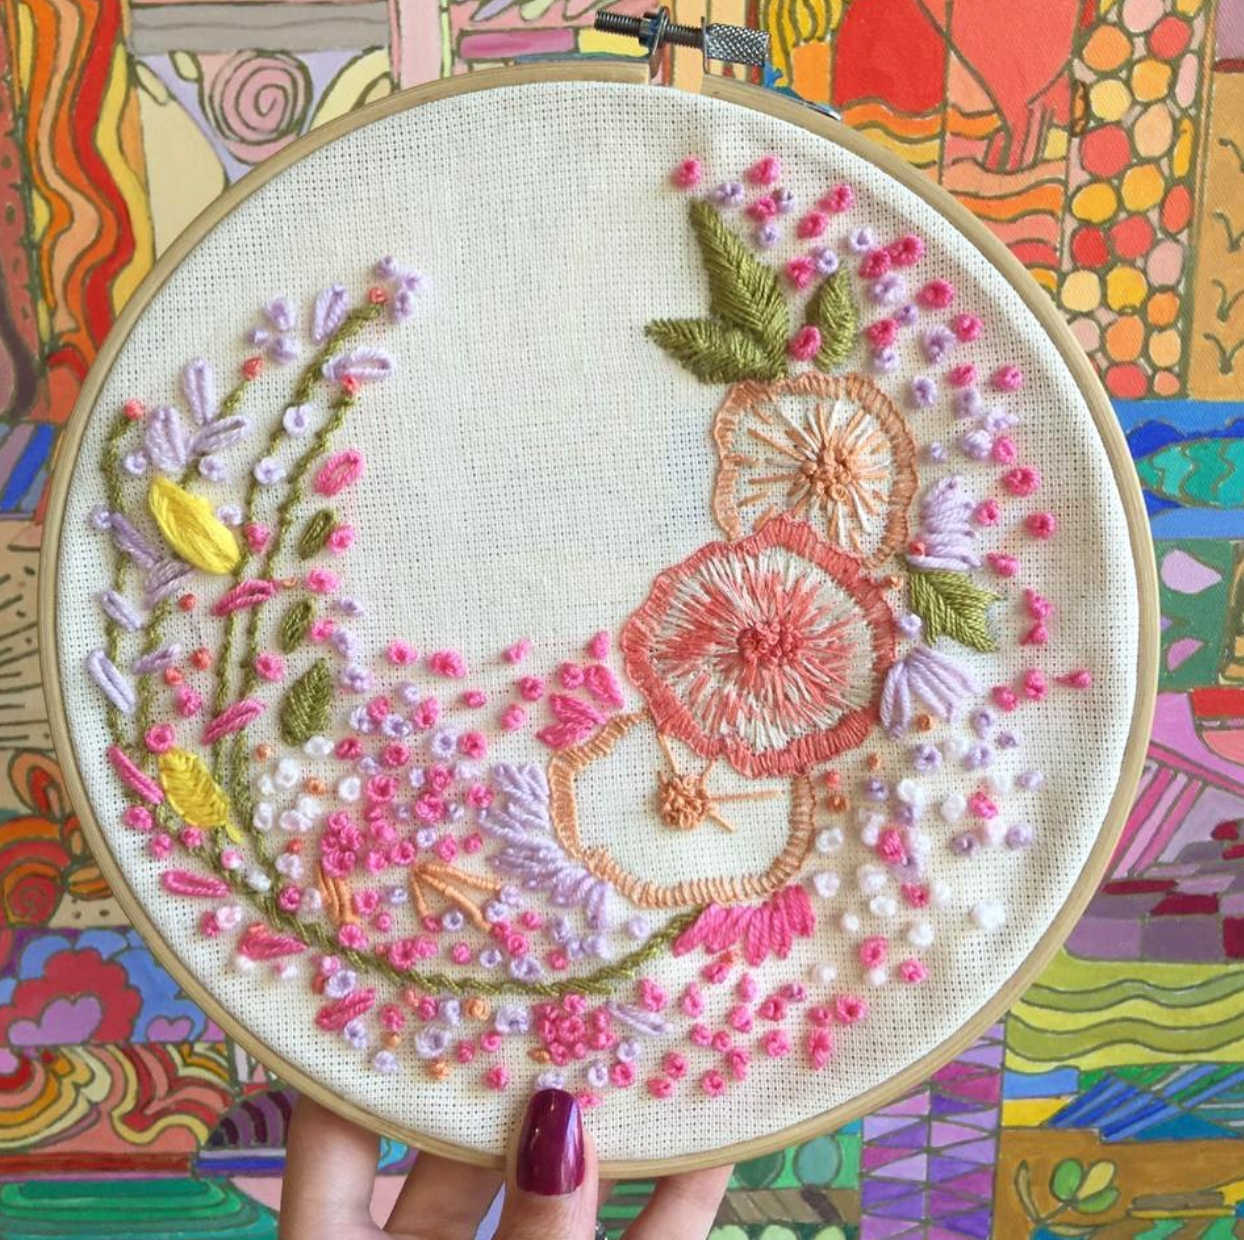 Handmade embroidery hoop with spring floral design